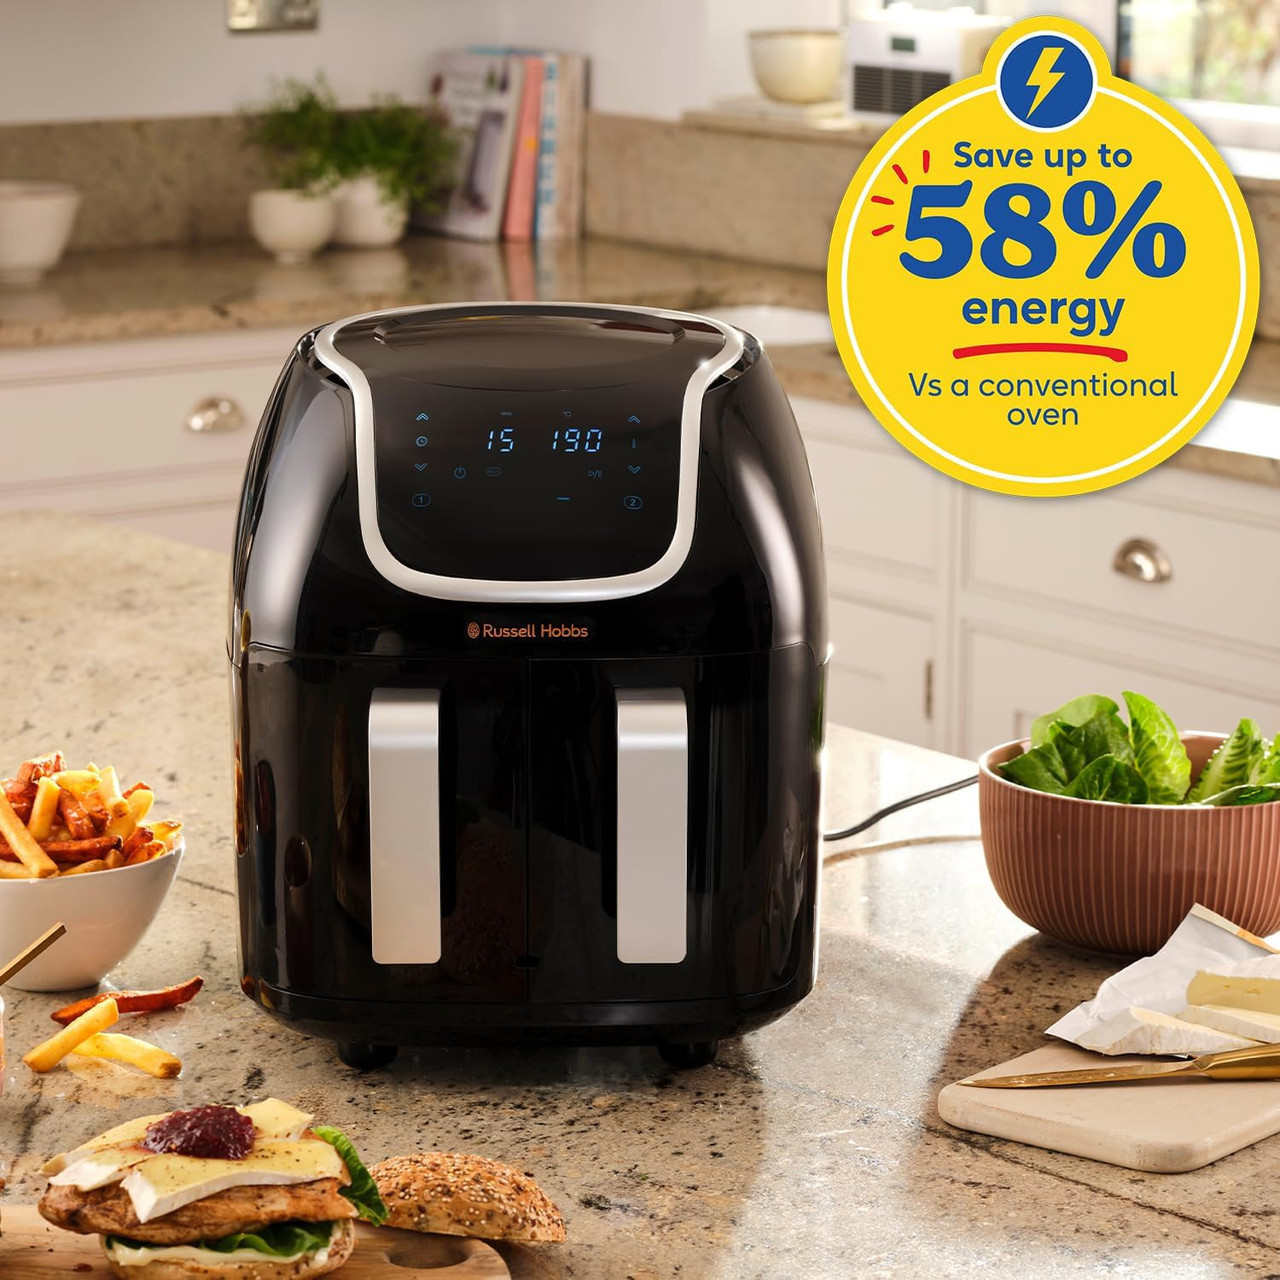 https://cdn11.bigcommerce.com/s-8ek7z3h3jn/images/stencil/1280x1280/products/9179/51135/russell-hobbs-satisfry-snappi-dual-basket-air-fryer-or-27290__84775.1691648015.jpg?c=1?imbypass=on